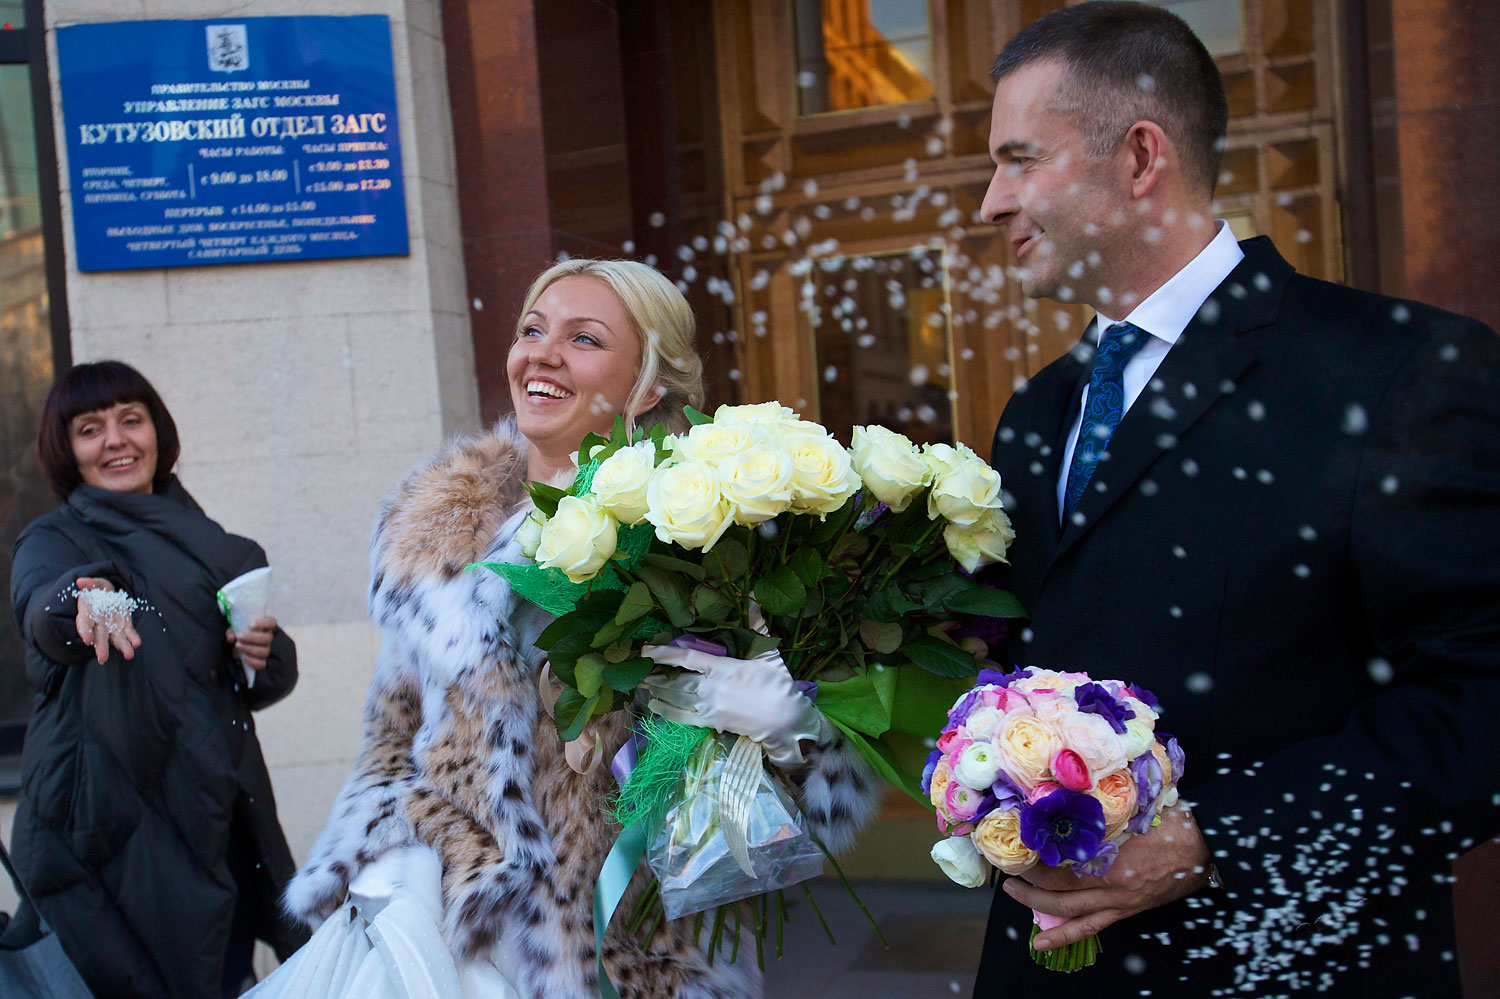 image: Olga and Gleb Danylyan are congratulated after getting married in Moscow.